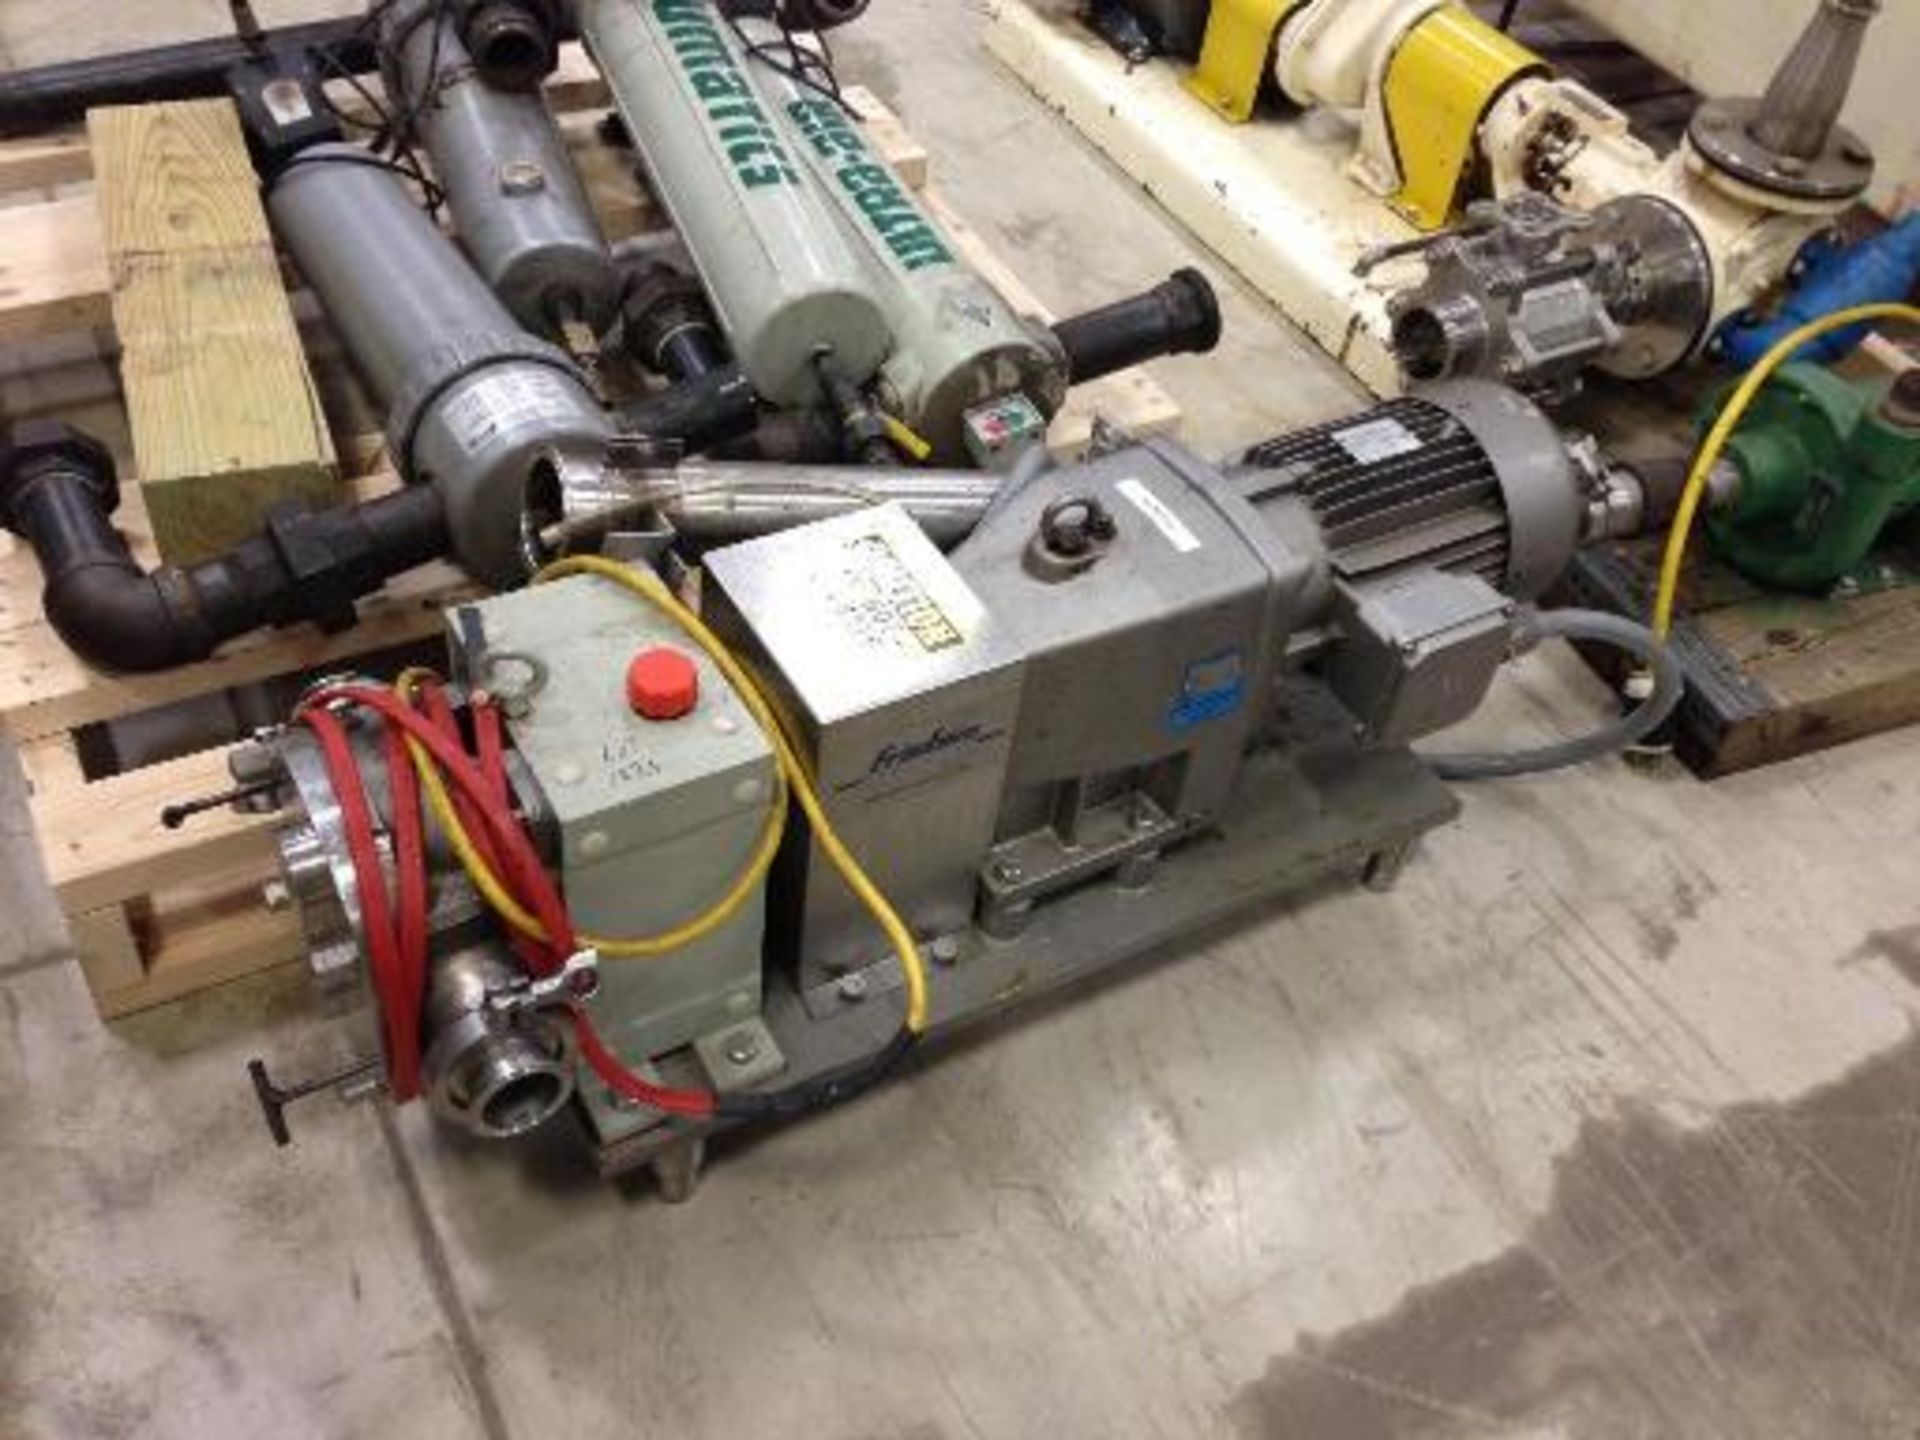 Fristam PD pump model FLK 50, s/n 007725 with electric motor and drive. This item located in Grand